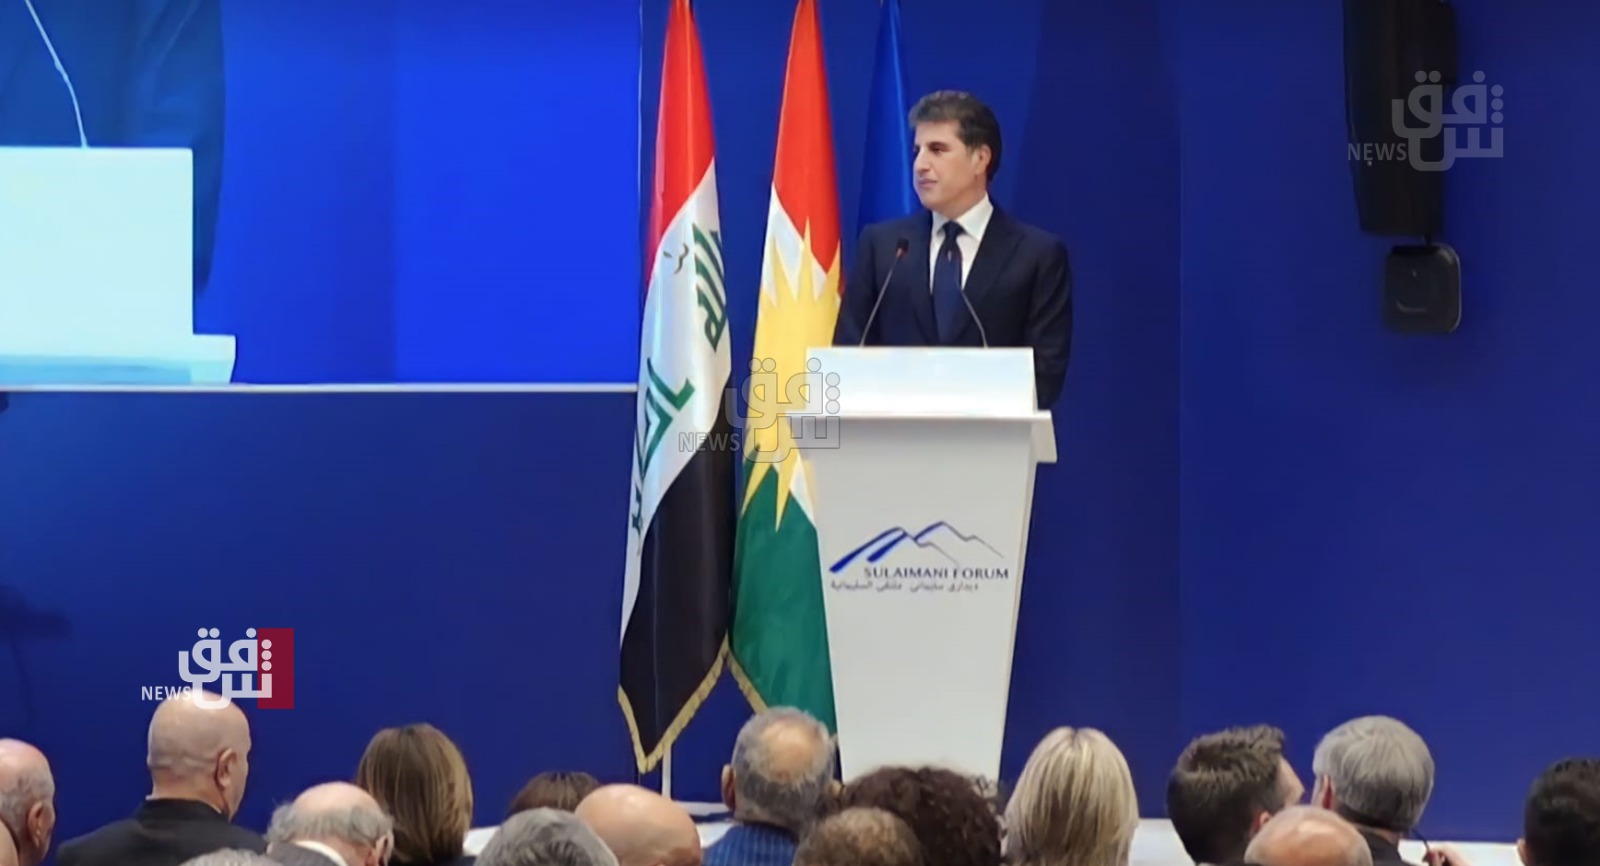 President Barzani reiterates commitment to backing the federal government